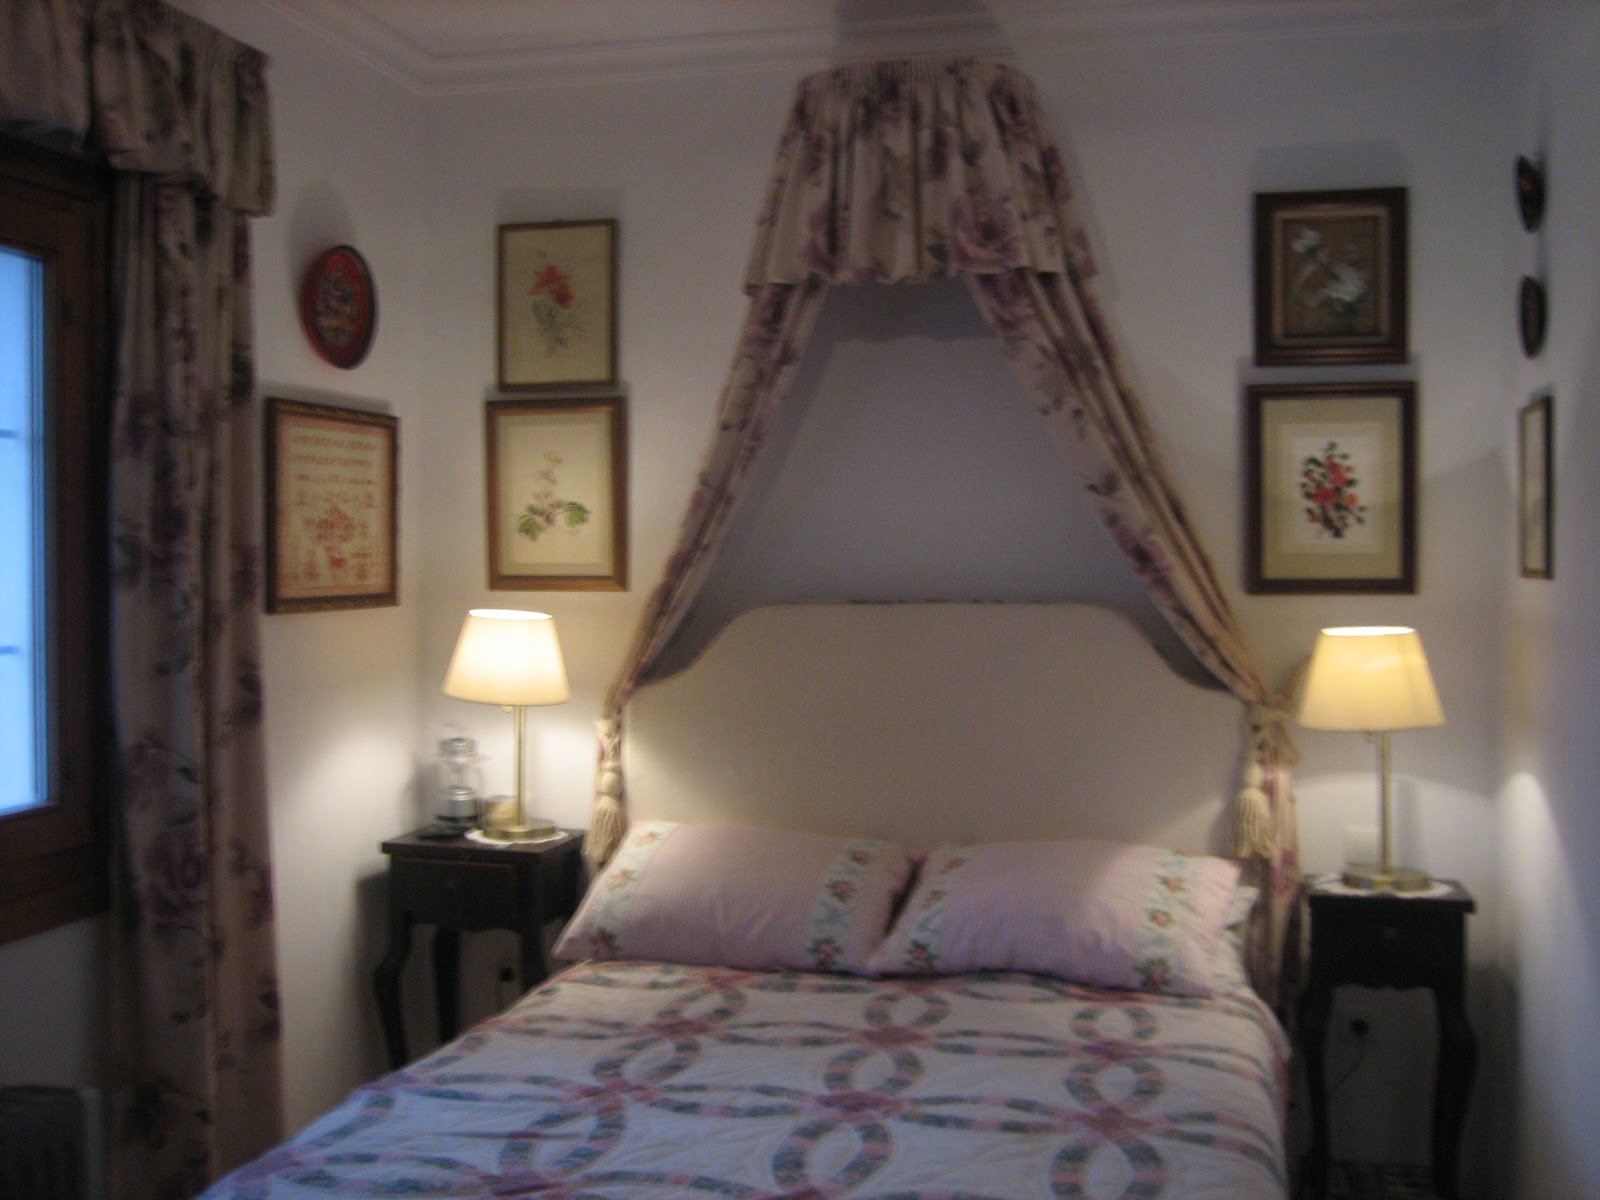 Challenging Arts & Crafts: Decorate A Small Elegant Bedroom